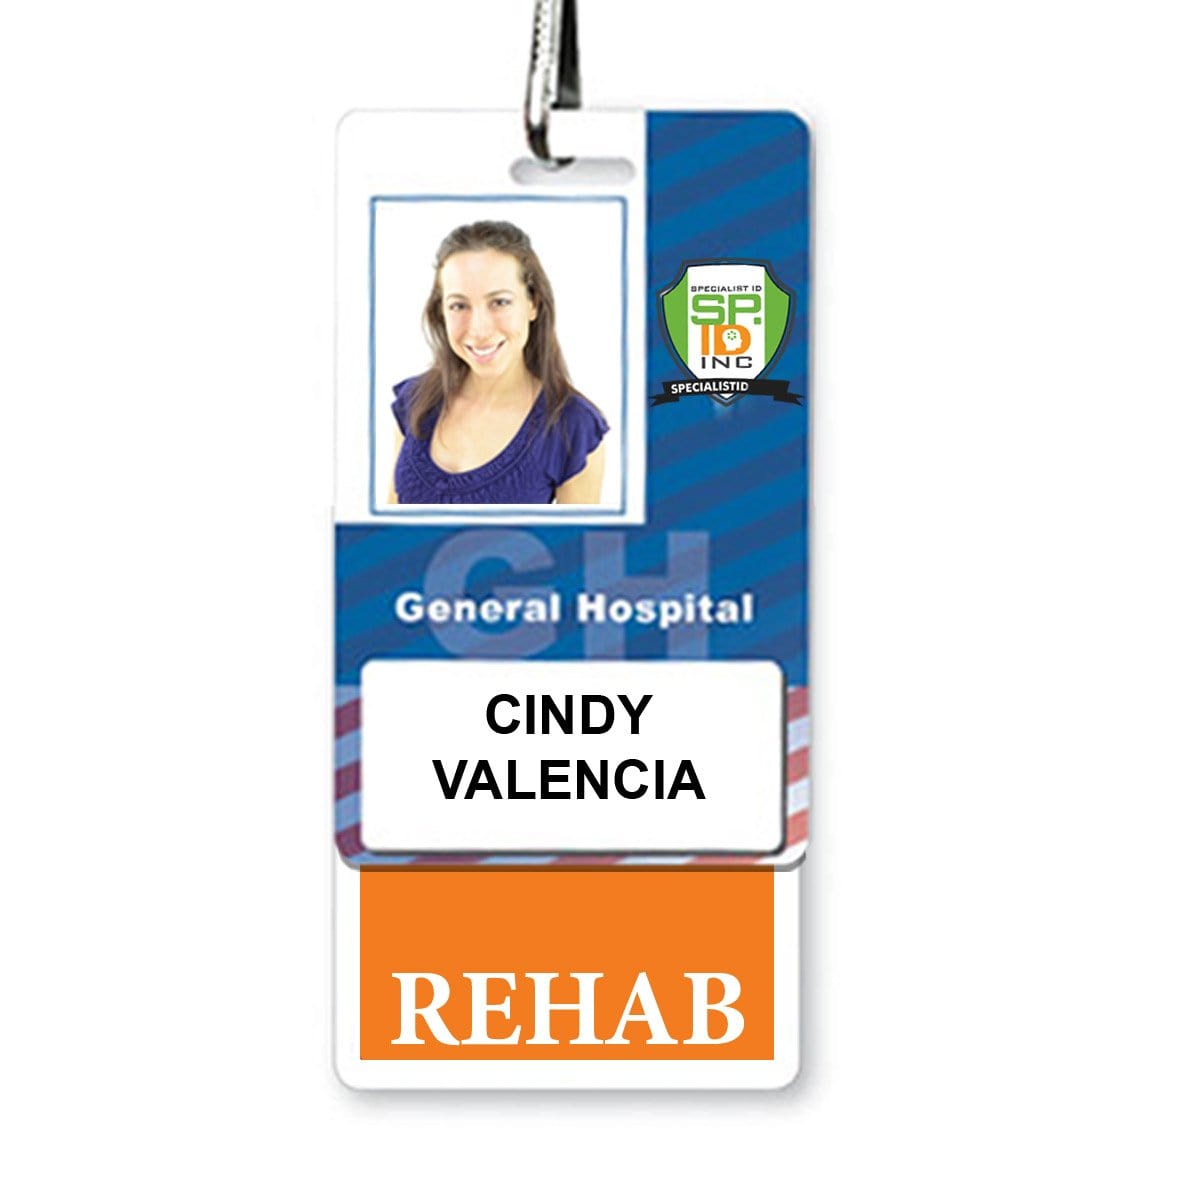 REHAB Vertical Badge Buddy with ORANGE Border and more Hospital